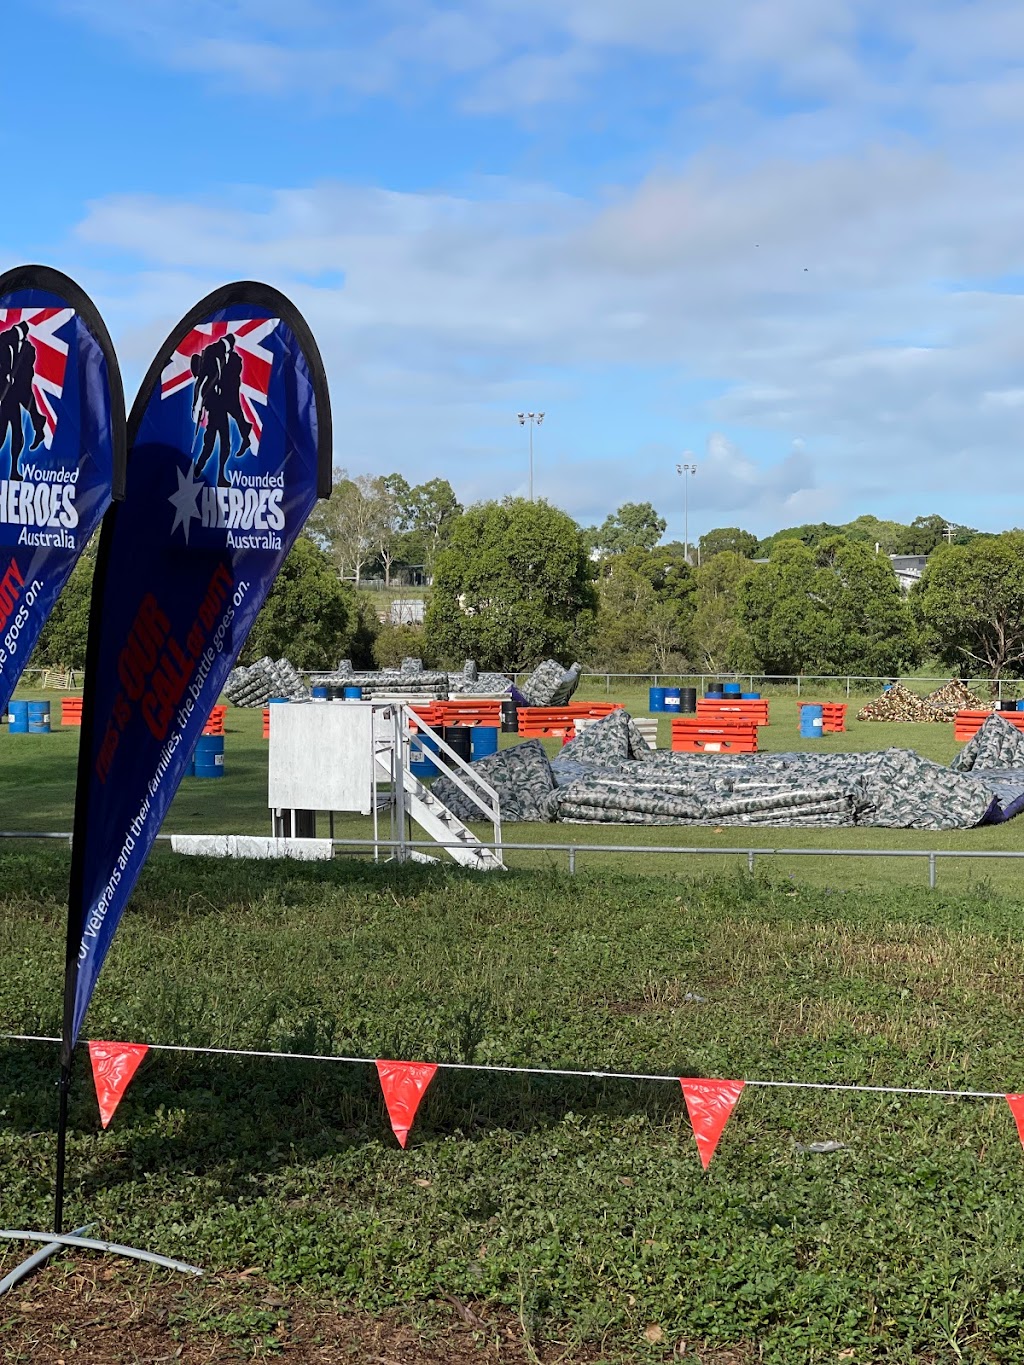 Wounded Heroes Gelball | 221 Grindle Rd, Wacol QLD 4076, Australia | Phone: 0478 826 646